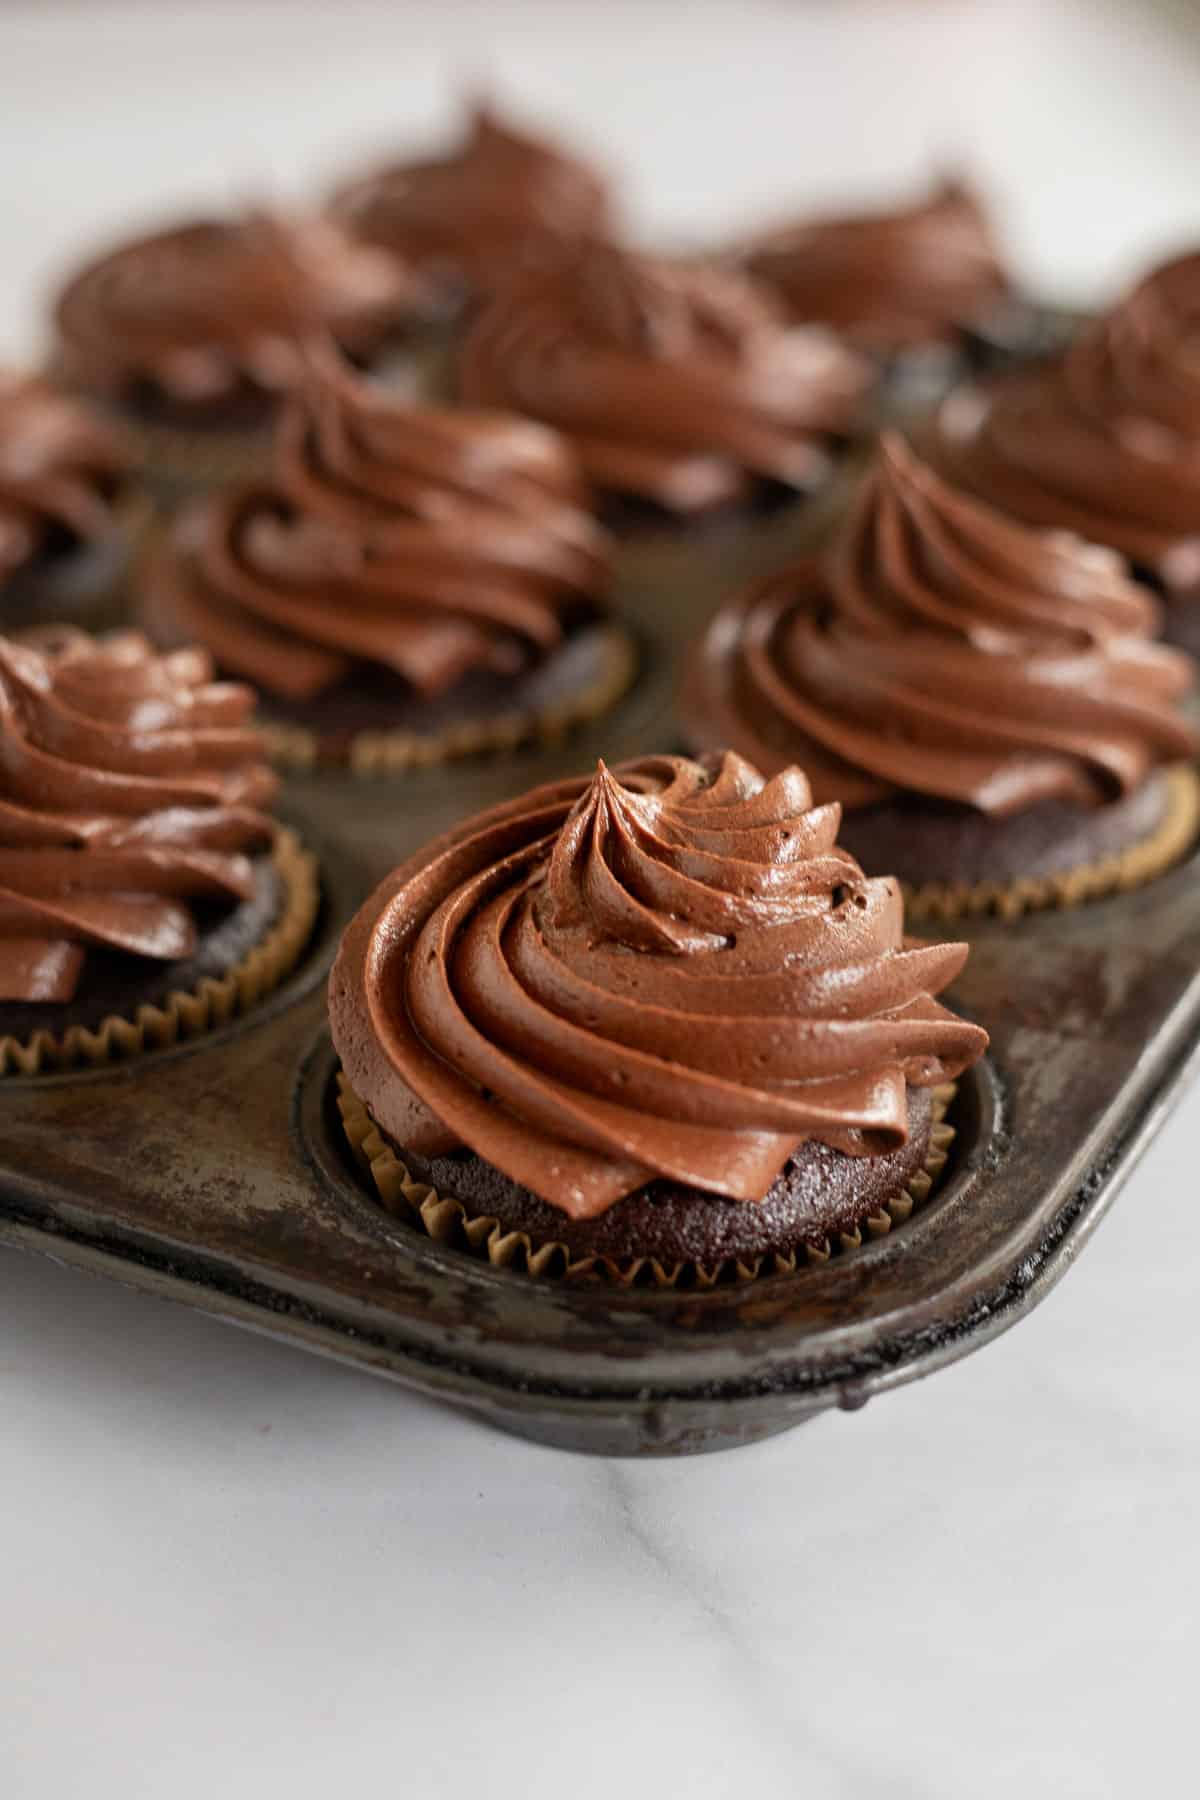 fudgy chocolate ganache frosting piped onto chocolate cupcakes in a muffin pan.